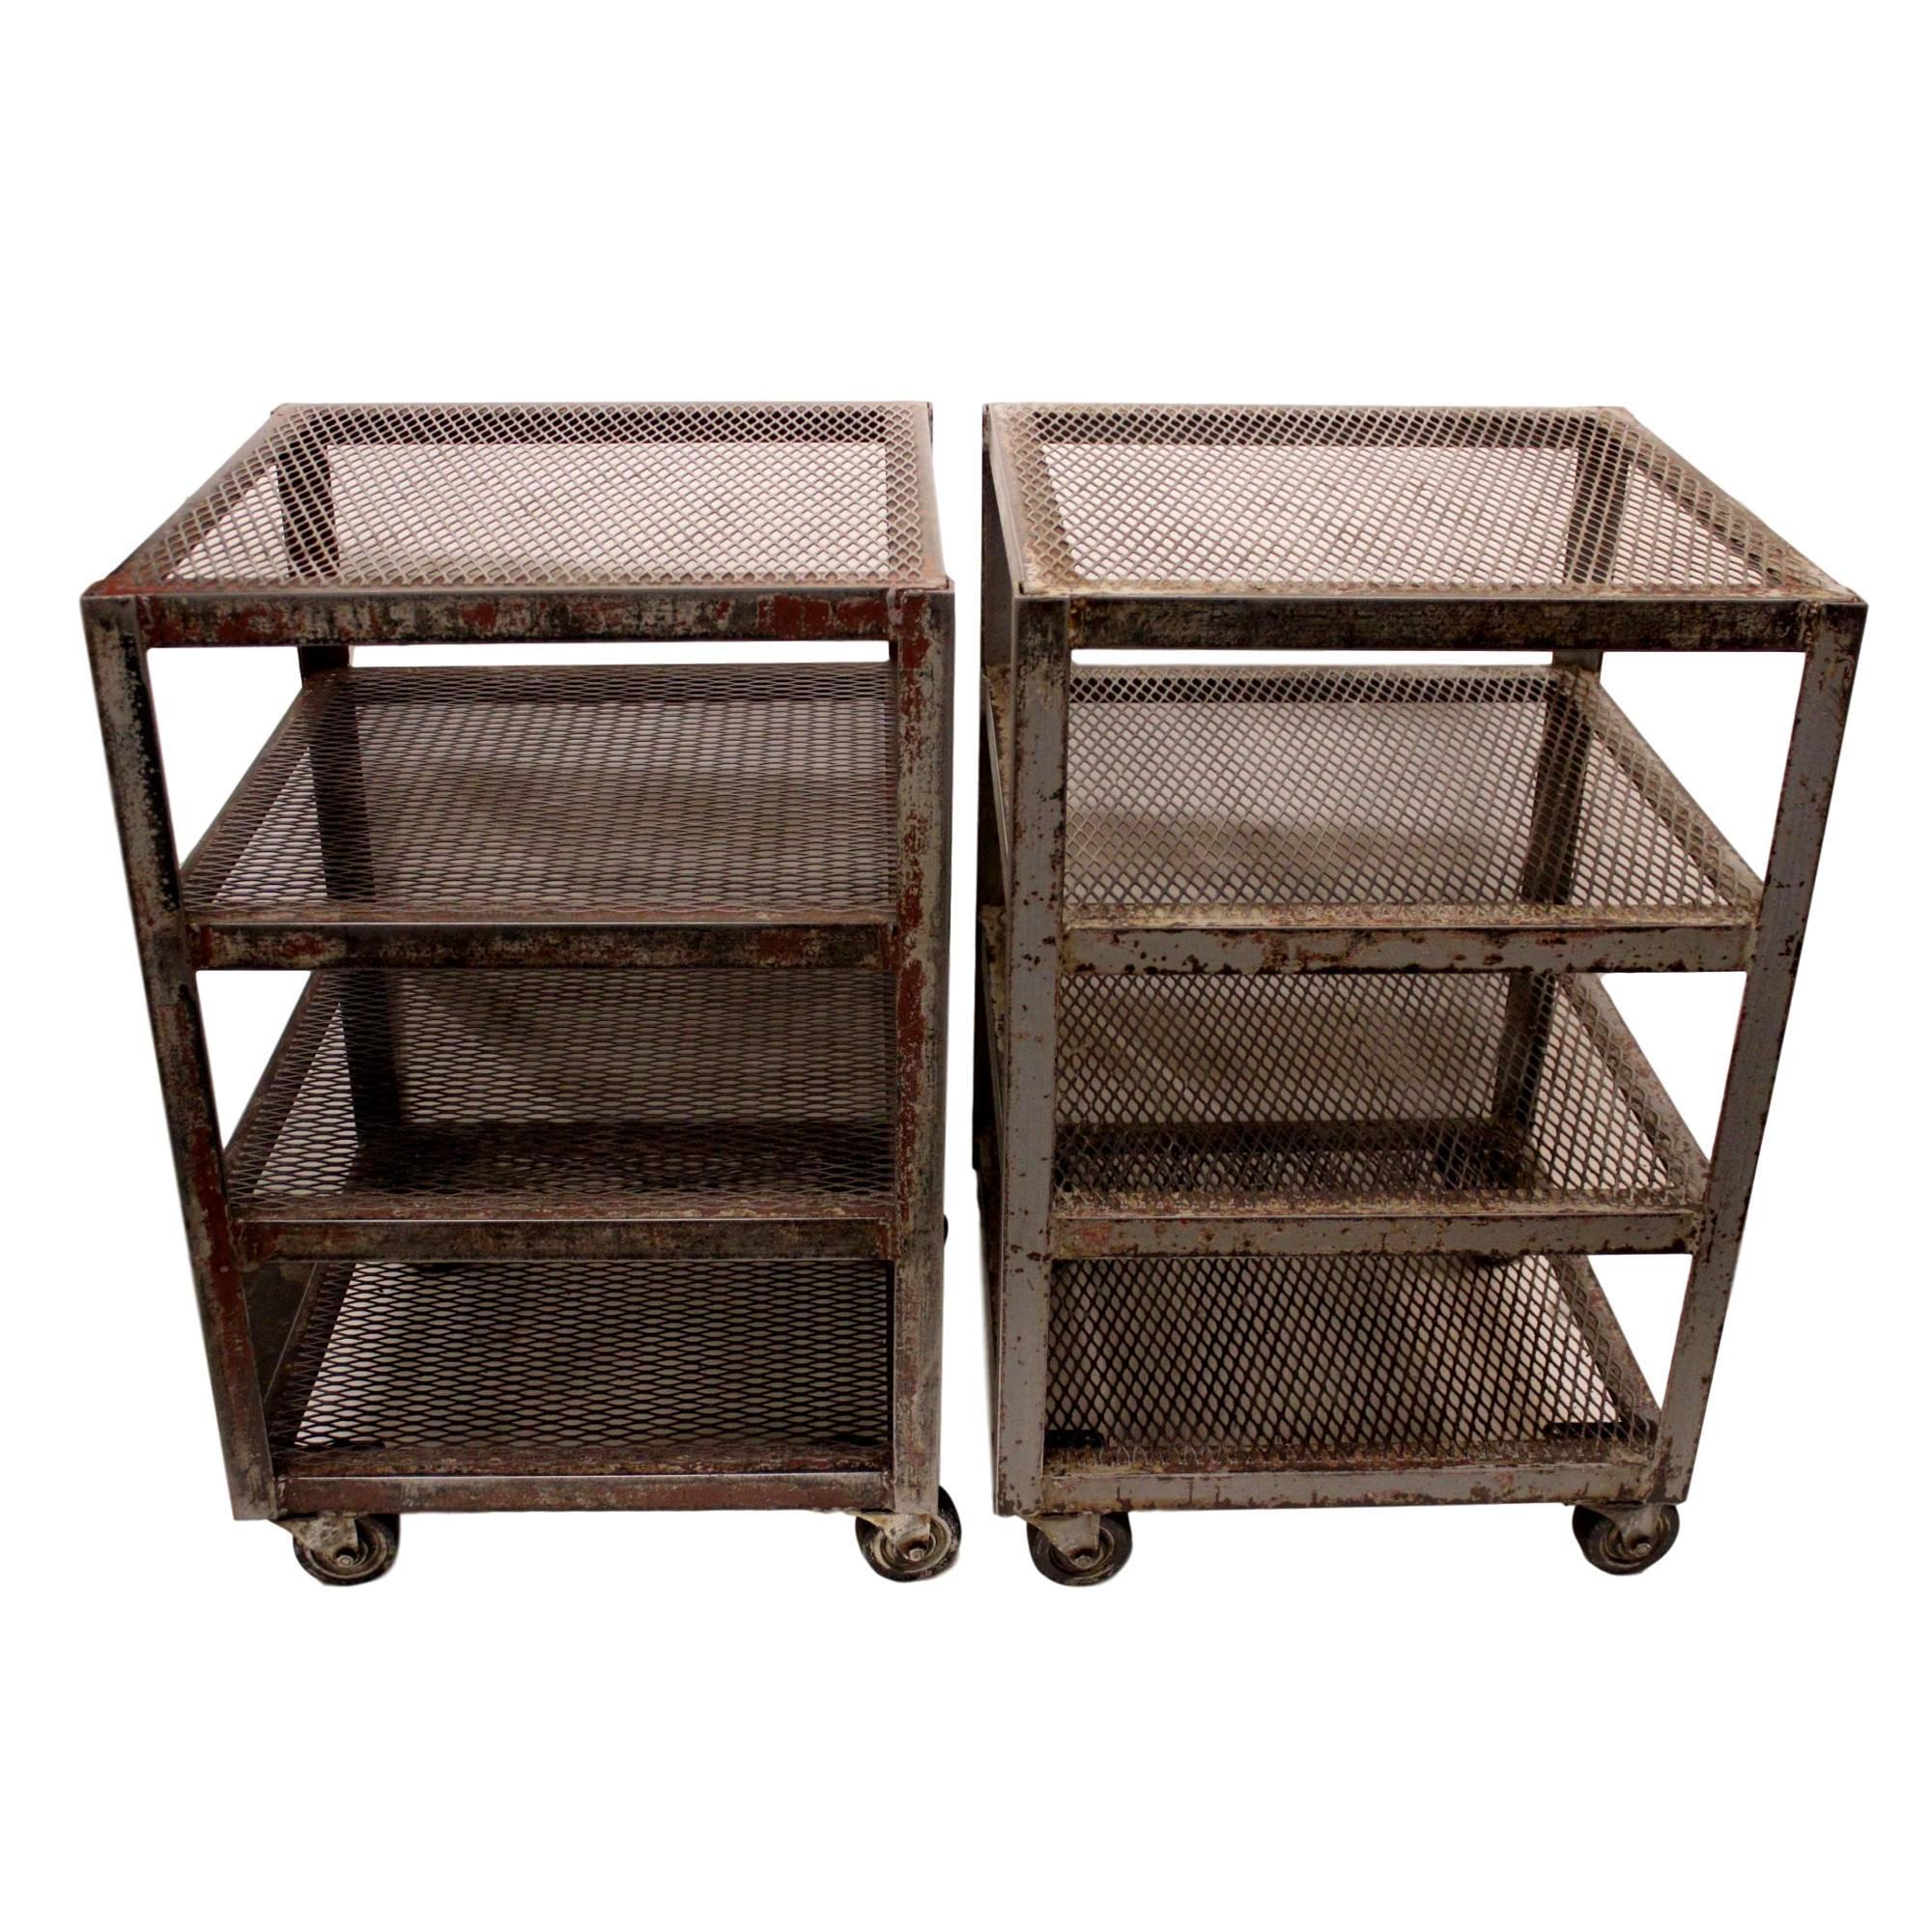 This wonderful pair of vintage factory carts feature solid steel construction with a beautifully worn painted patina (browns and grays) and 4 steel mesh shelves. Carts are a great size and feature wheels for even more versatility.